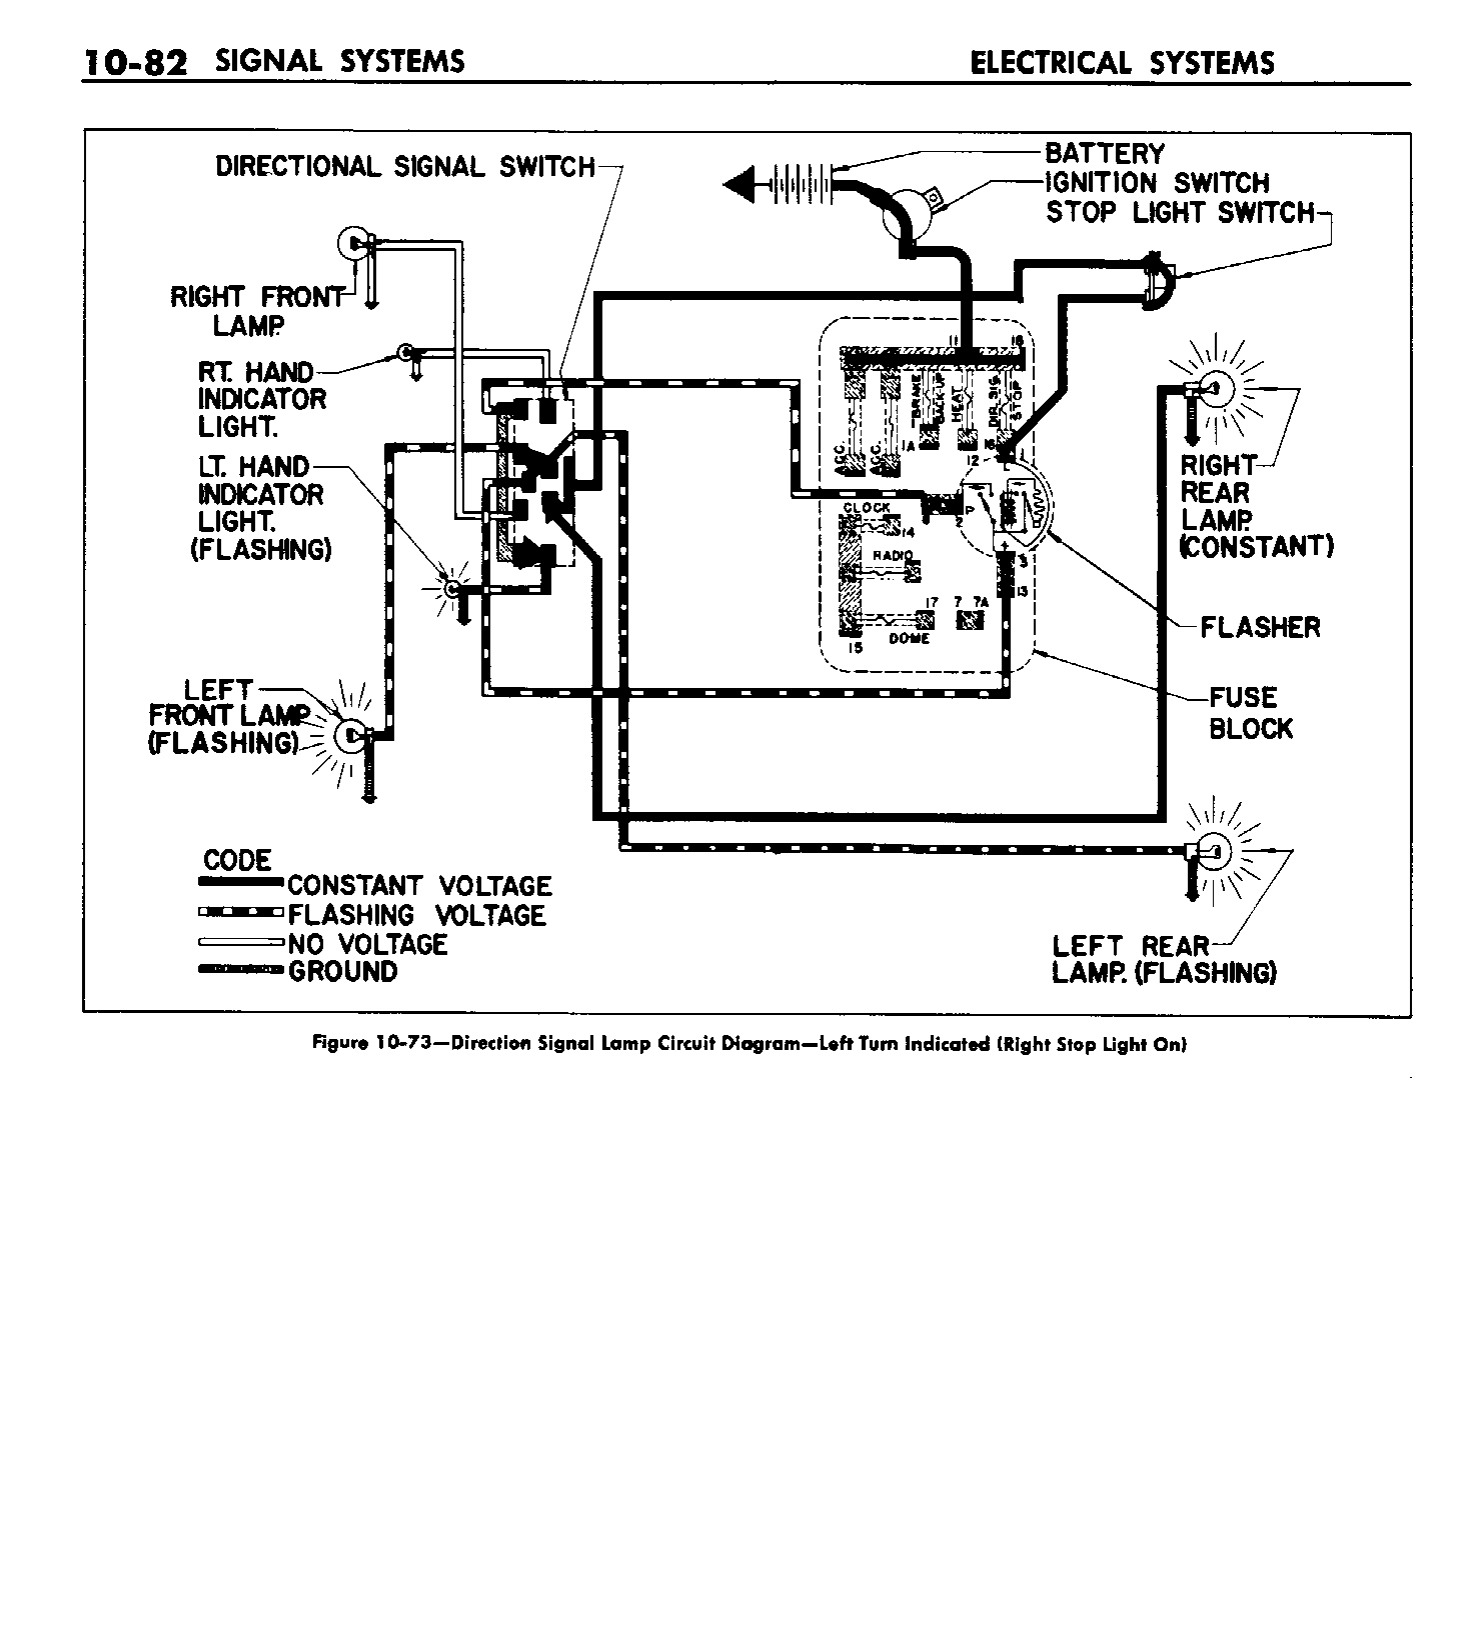 n_11 1958 Buick Shop Manual - Electrical Systems_82.jpg